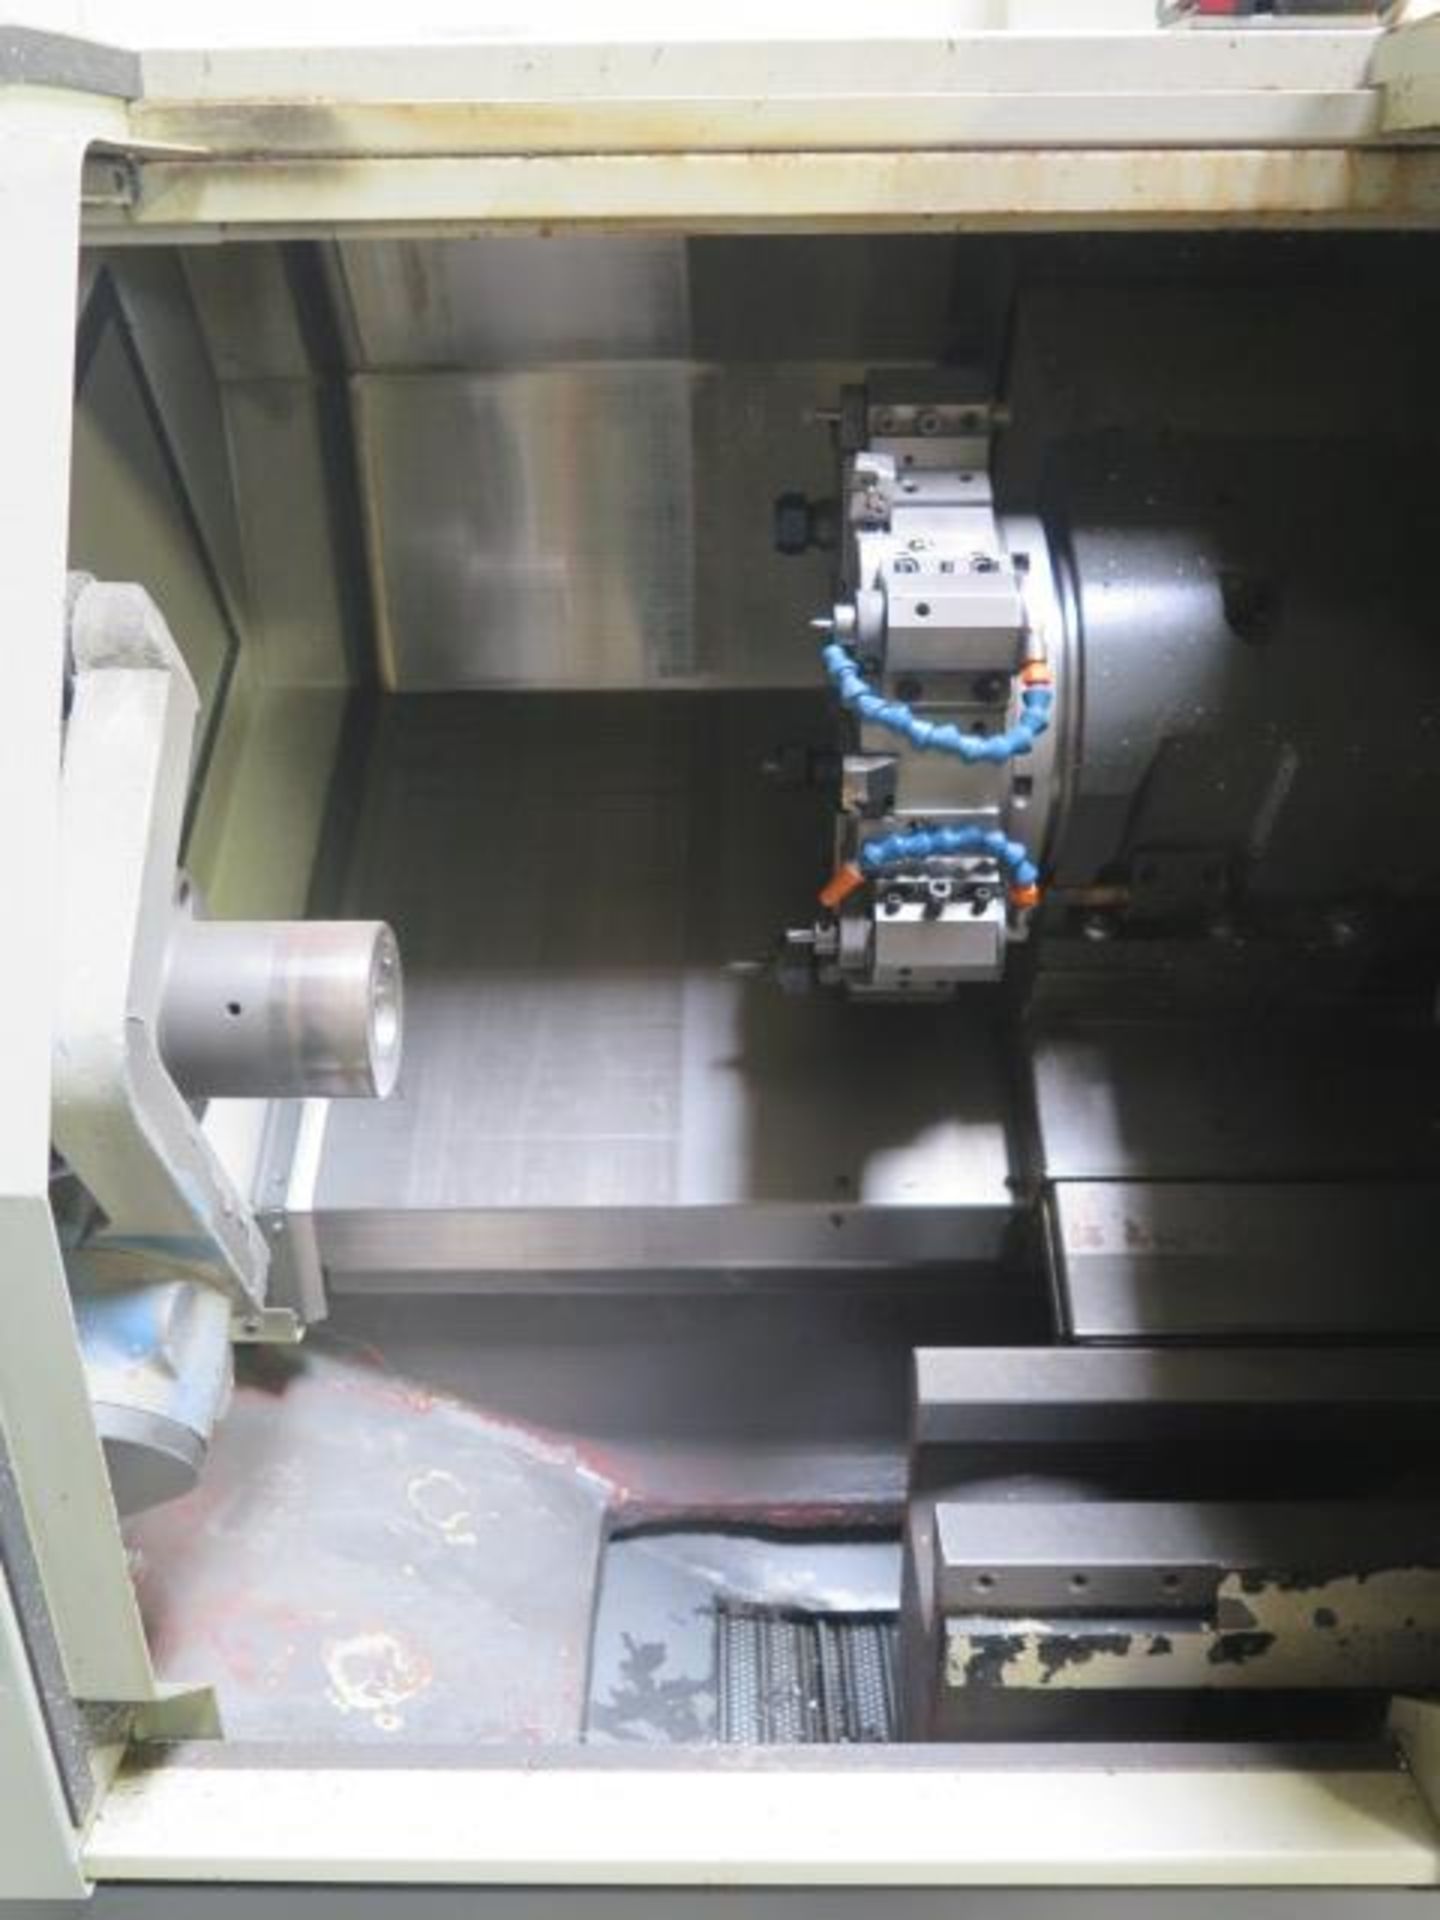 2014 Femco HL-25N CNC Lathe r s/n L114-2104 w/ Fanuc 0i-TD Controls, Tool Presetter, SOLD AS IS - Image 4 of 14